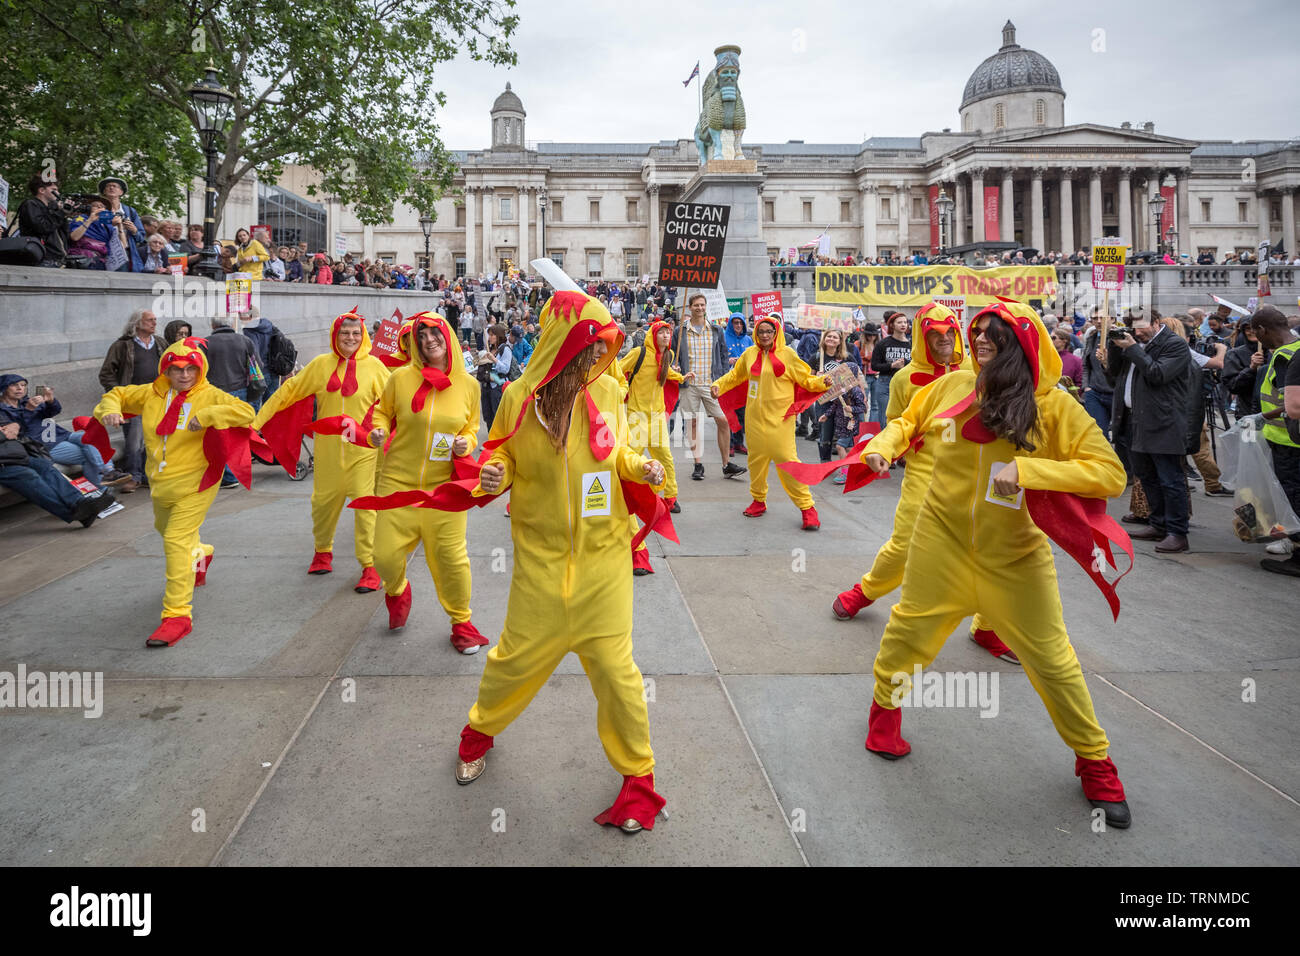 Chlorinated Chicken dancers perform in Trafalgar Square as part of the protests against US president Donald Trump's UK state visit. Stock Photo